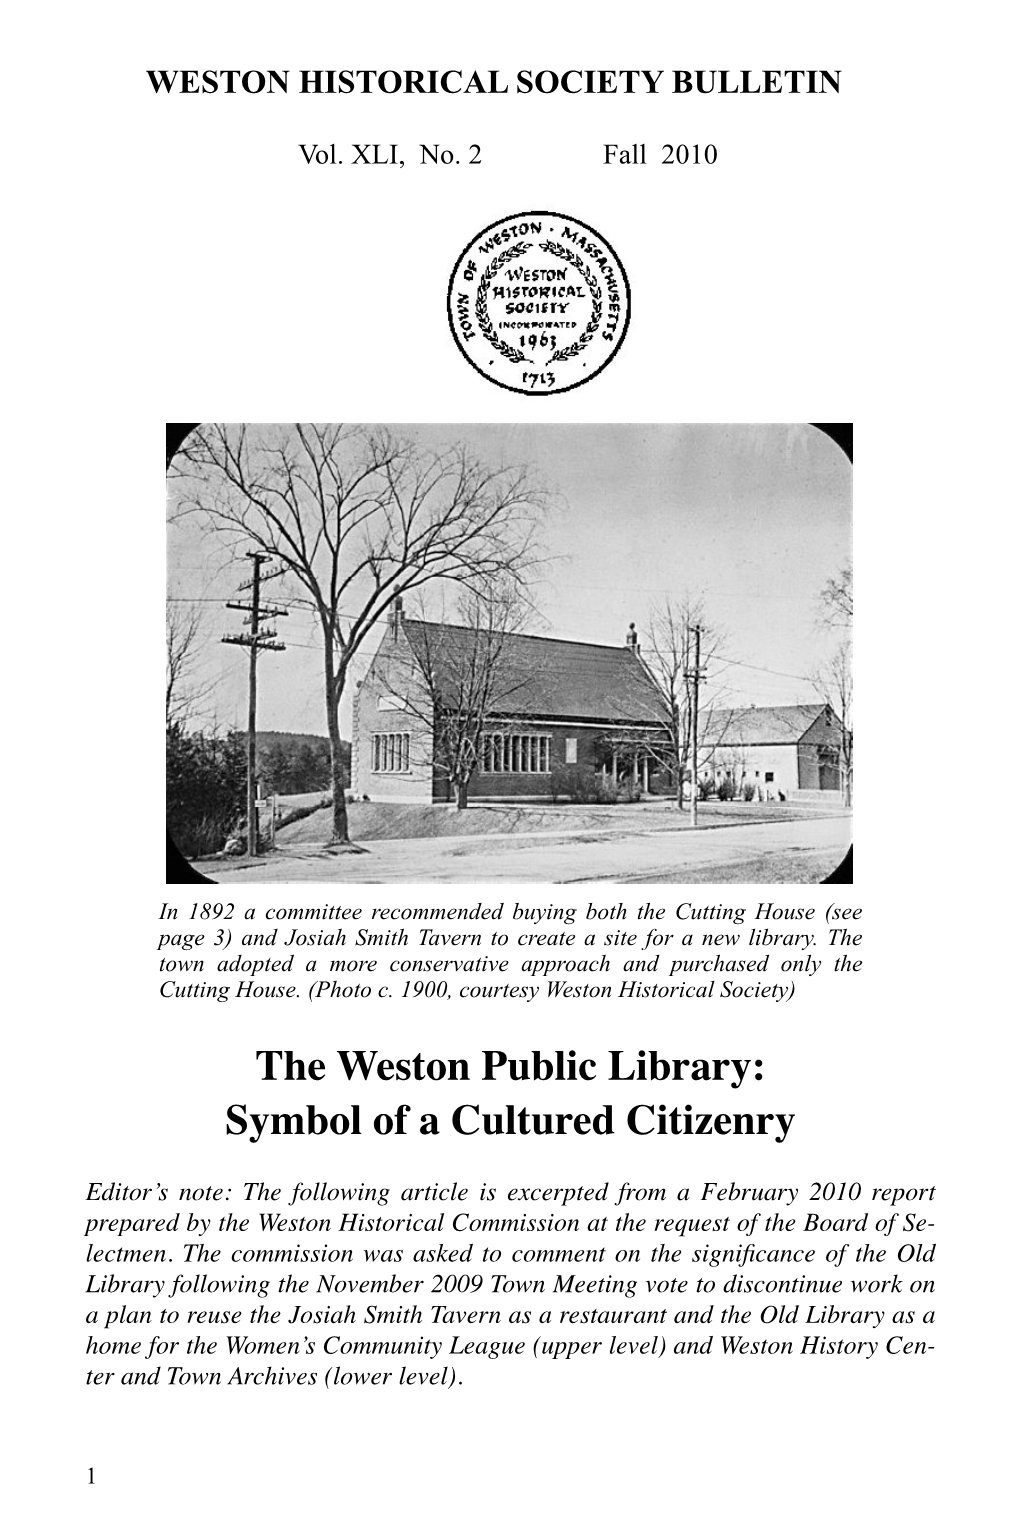 Weston Public Library: Symbol of a Cultured Citizenry